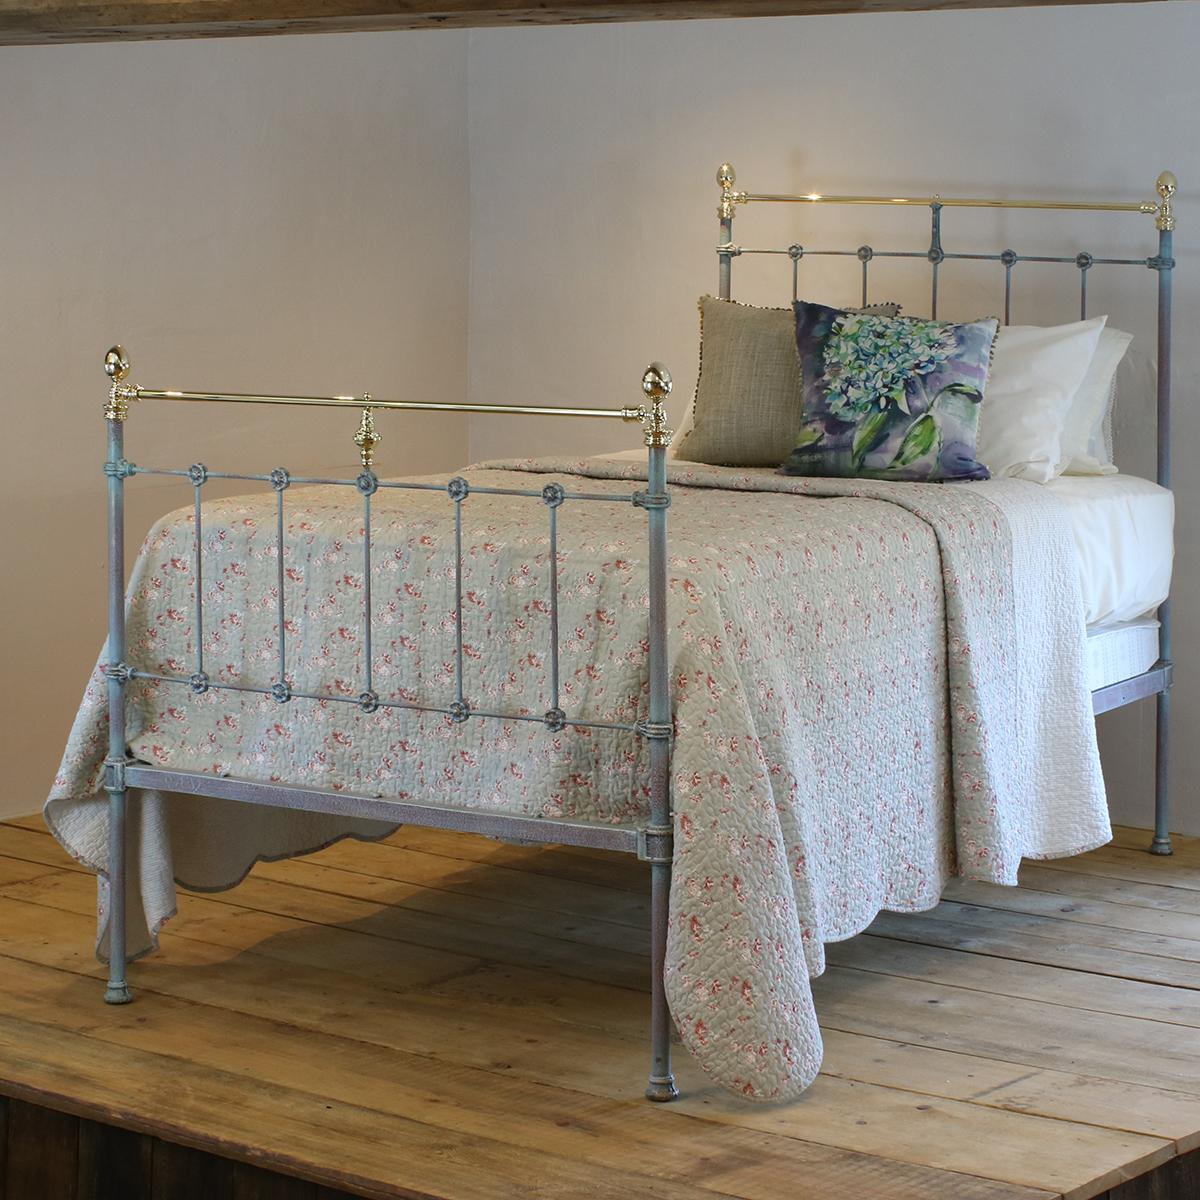 A matching pair of twin brass and iron beds finished in blue verdigris with straight brass top rails, egg-shaped cast brass knobs and decorative daisy-shaped castings.

These beds accept 3ft 6in wide (42 inch or 107 cm) bases and